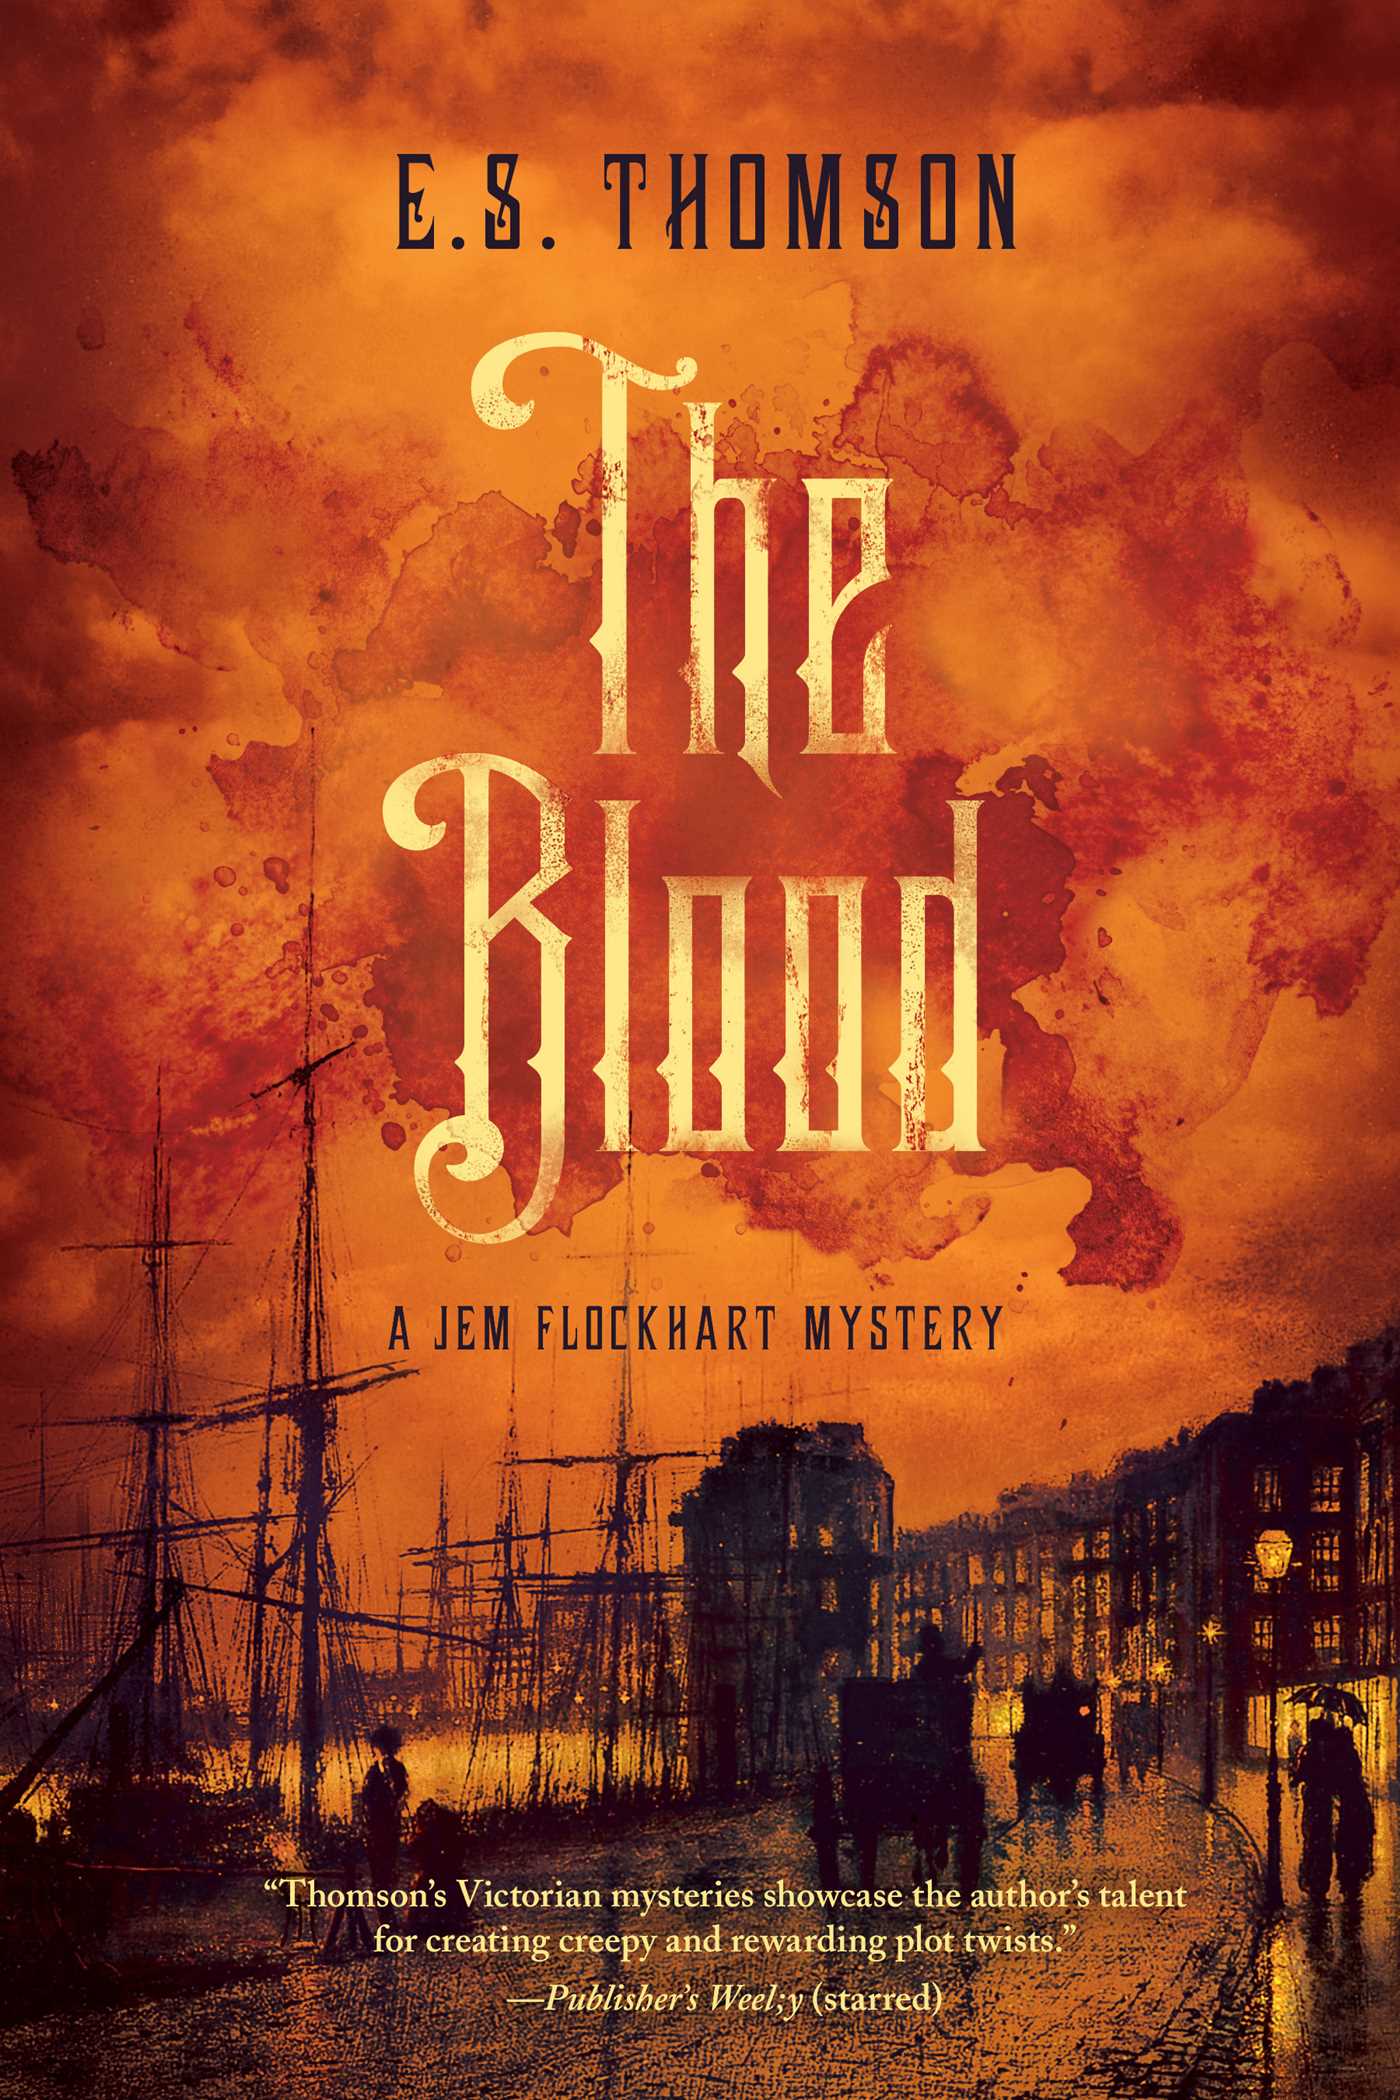 The Book of Blood by H.P. Newquist